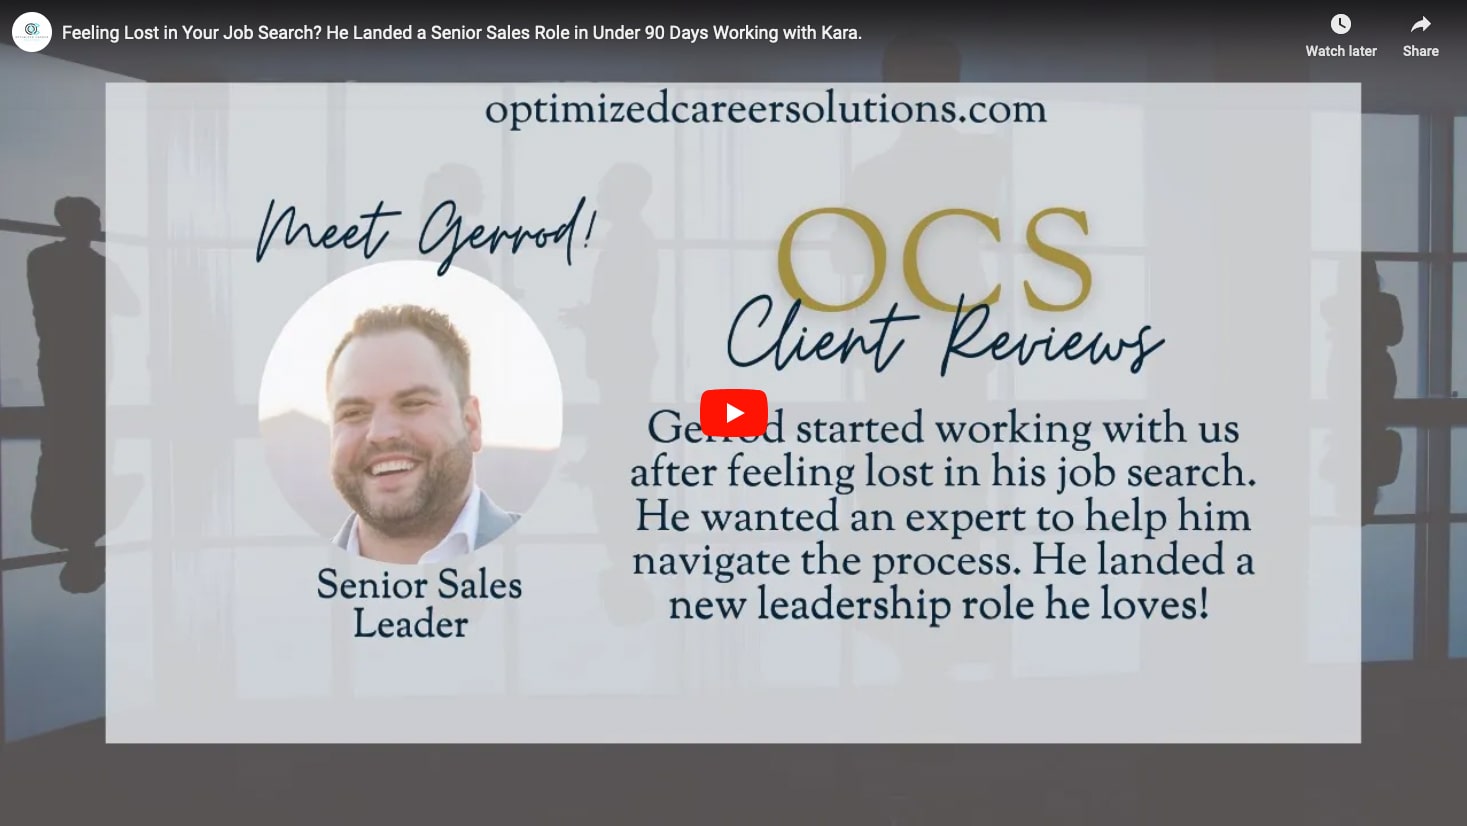 Feeling Lost in Your Job Search? He Landed a Senior Sales Role in Under 90 Days Working with Kara.